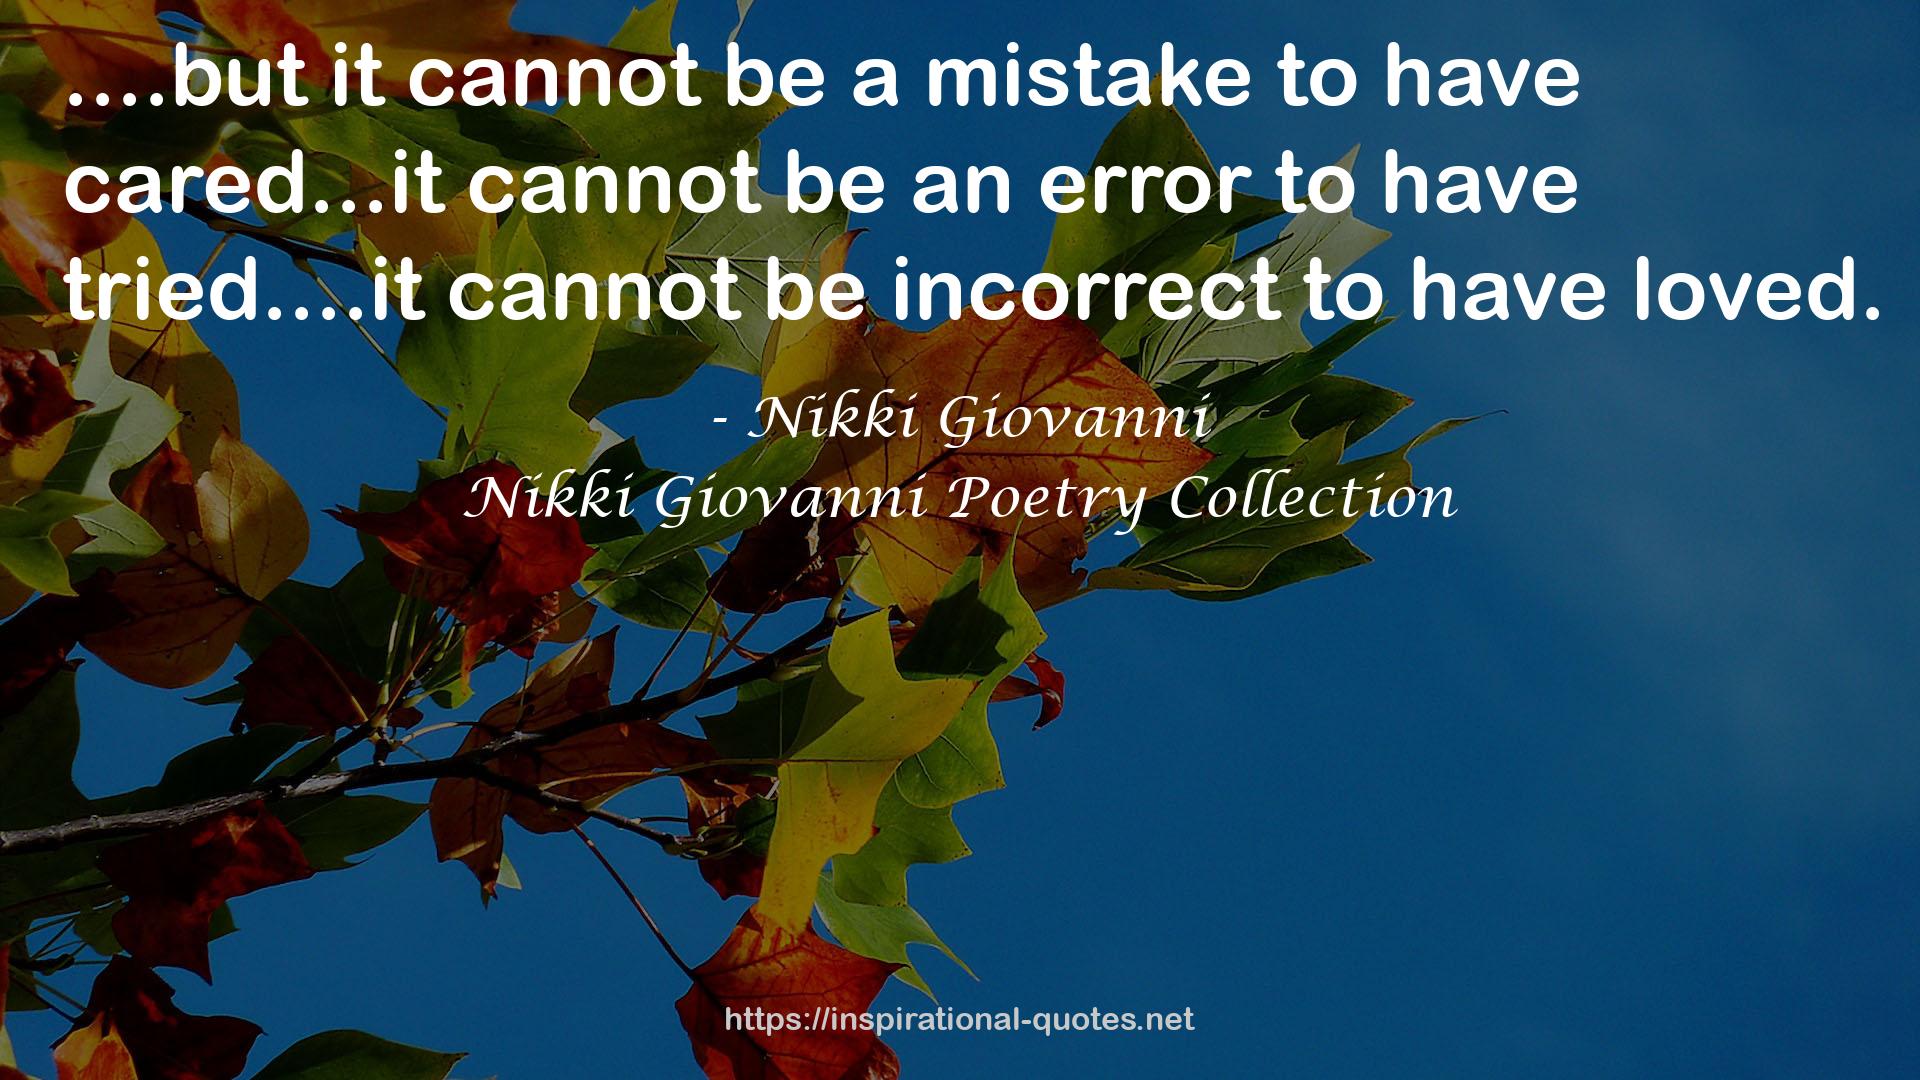 Nikki Giovanni Poetry Collection QUOTES